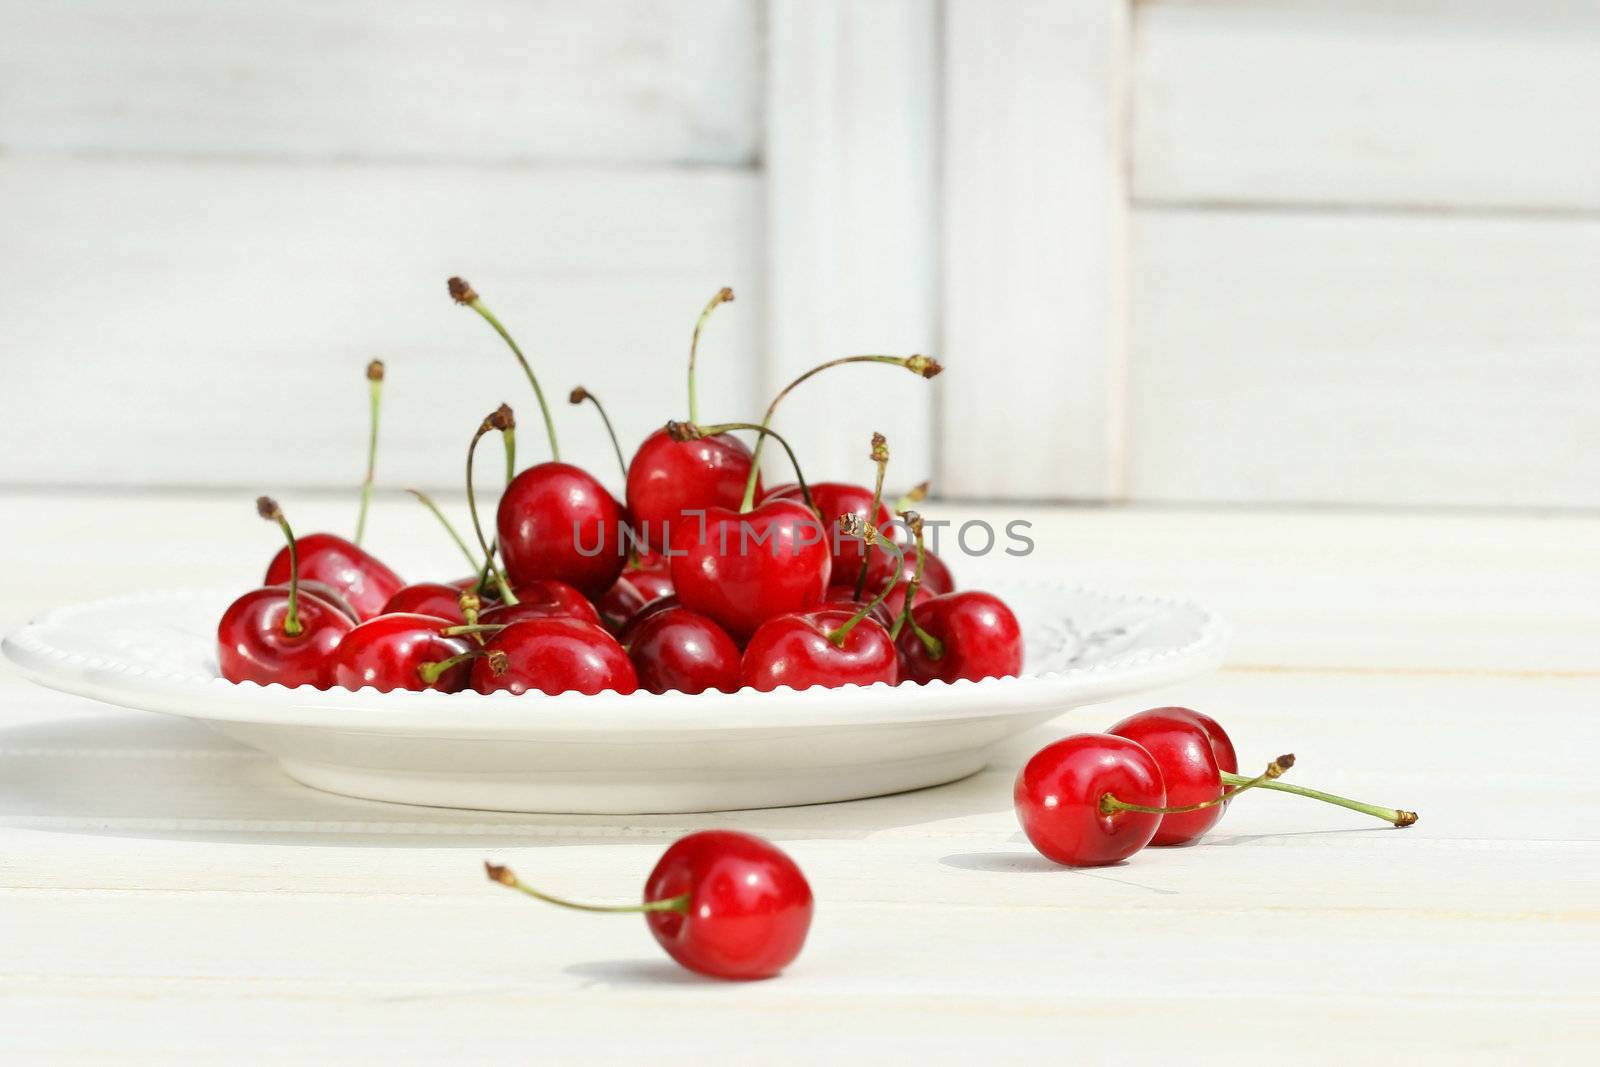 Cherries on a wite plate with white background